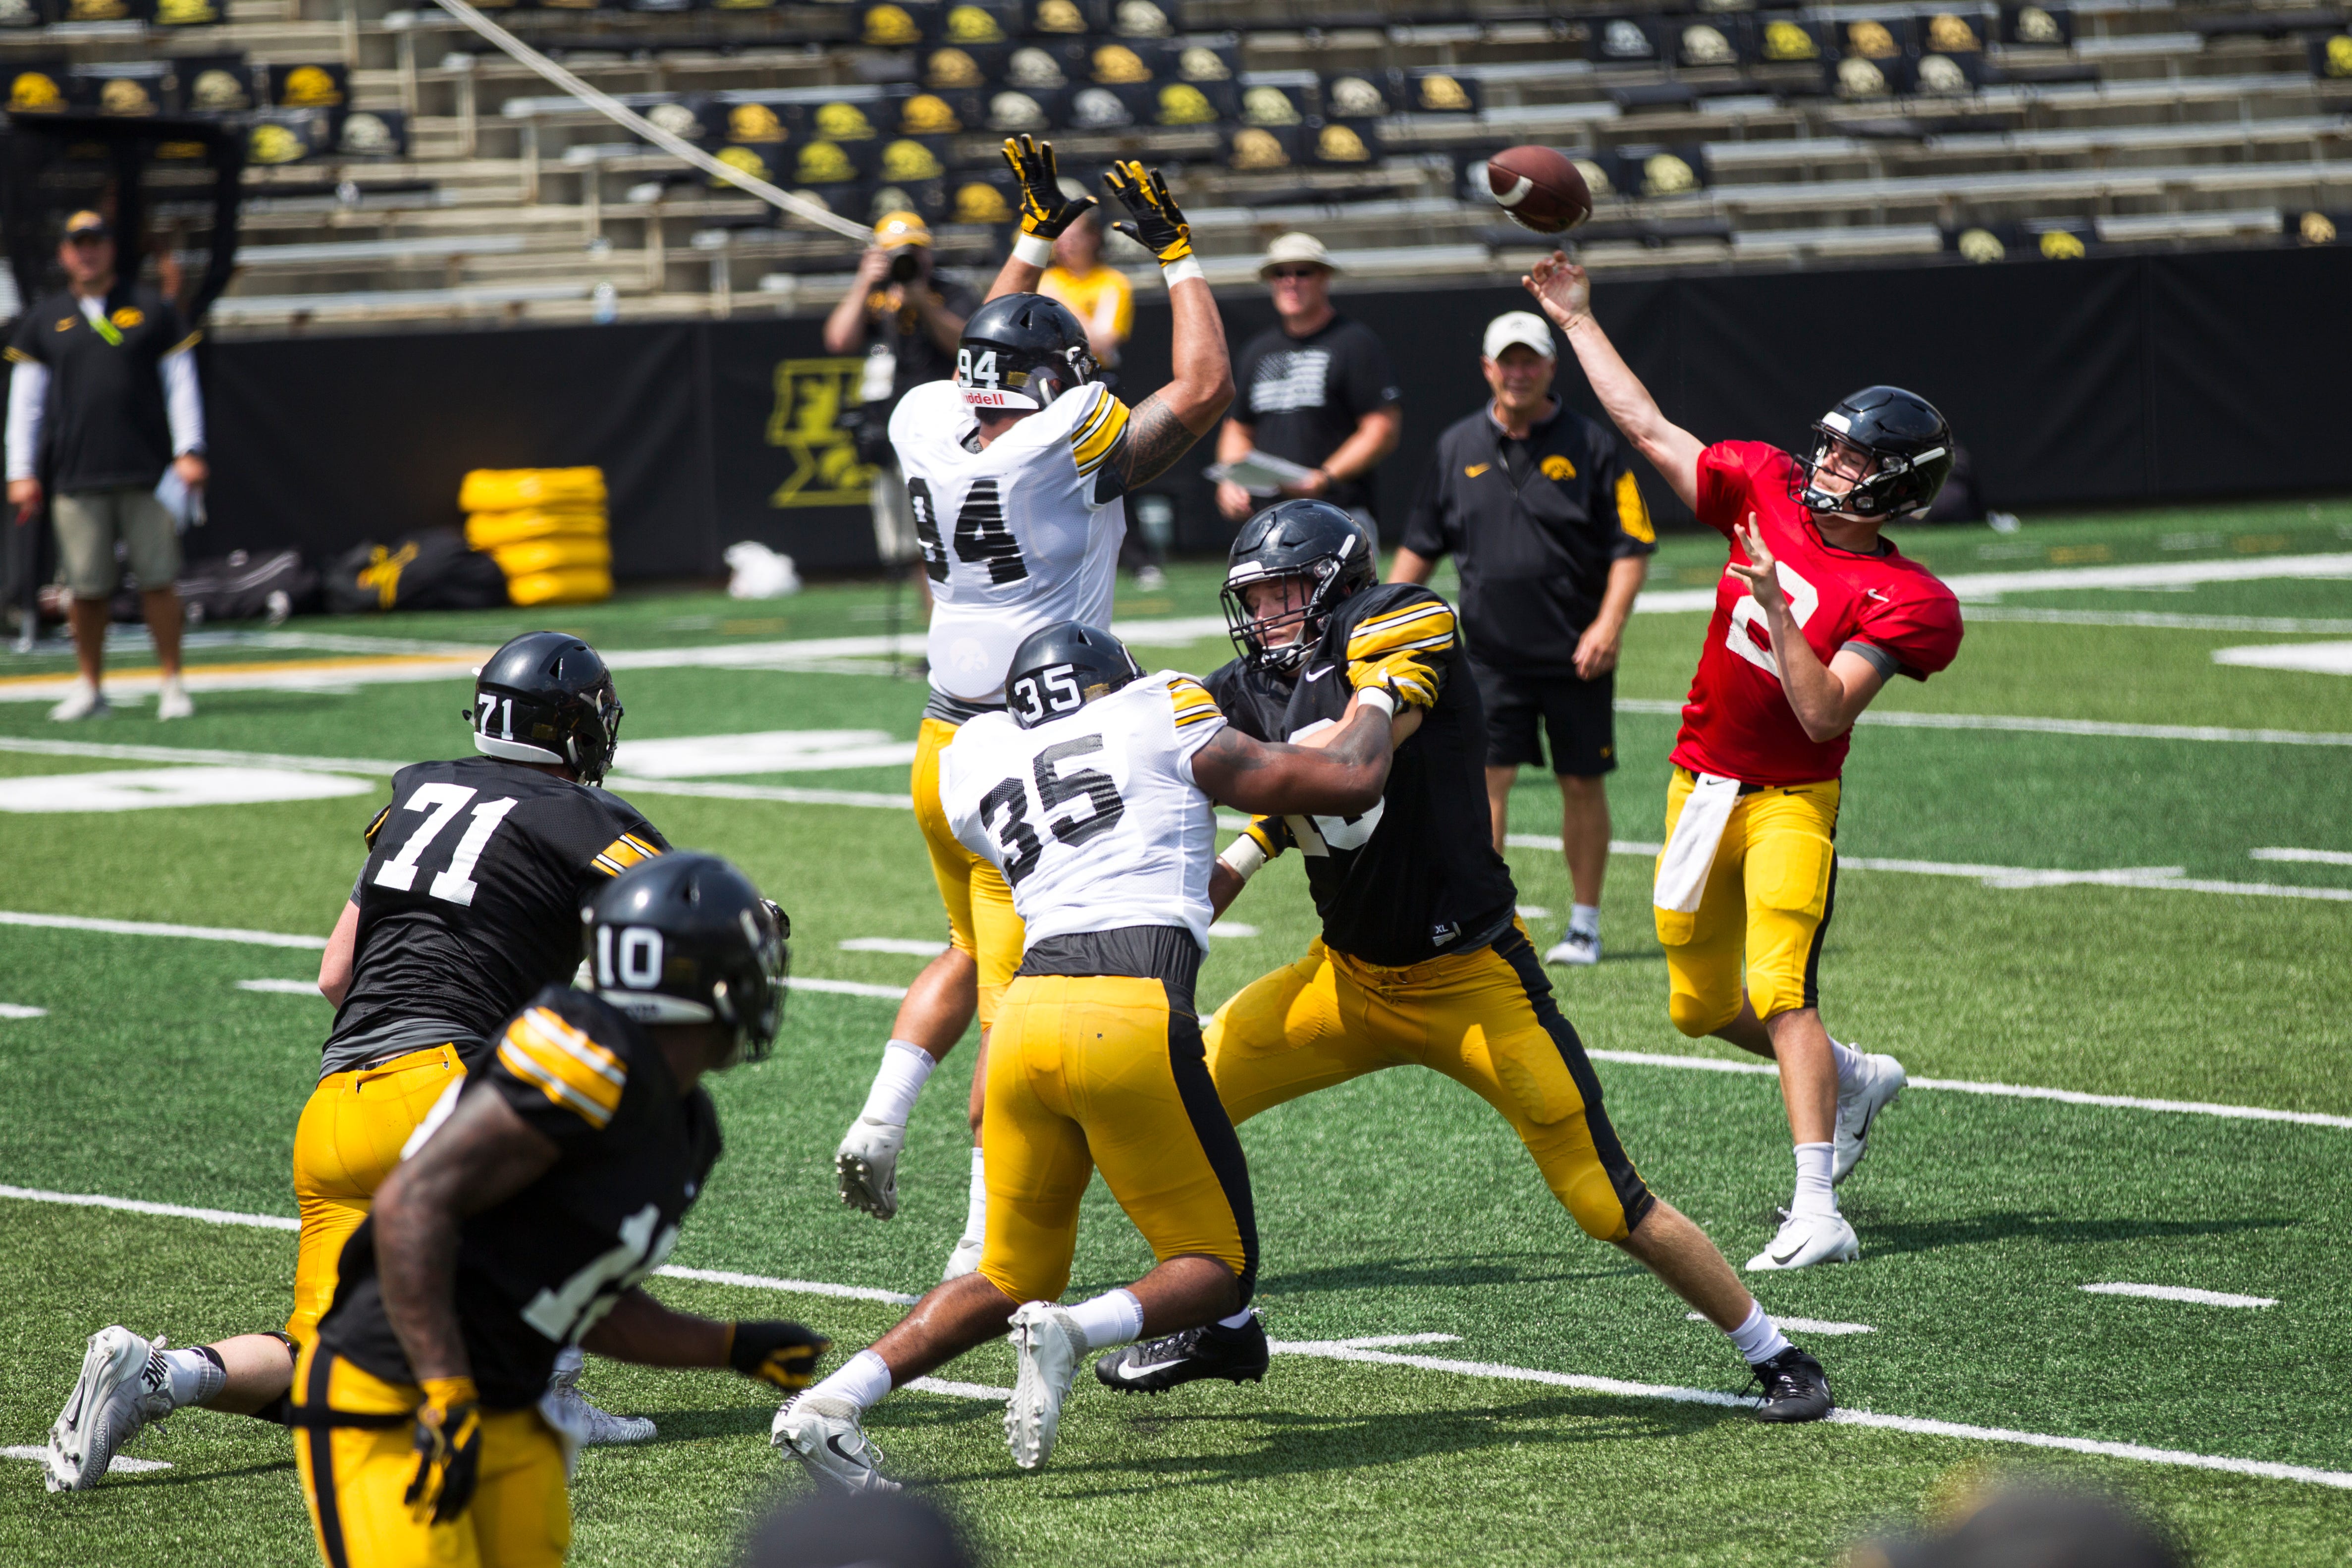 Iowa quarterback Peyton Mansell throws a pass while defensive end A.J. Epenesa gets his hands up during a Kids Day practice on Saturday, Aug. 11, 2018, at Kinnick Stadium in Iowa City.